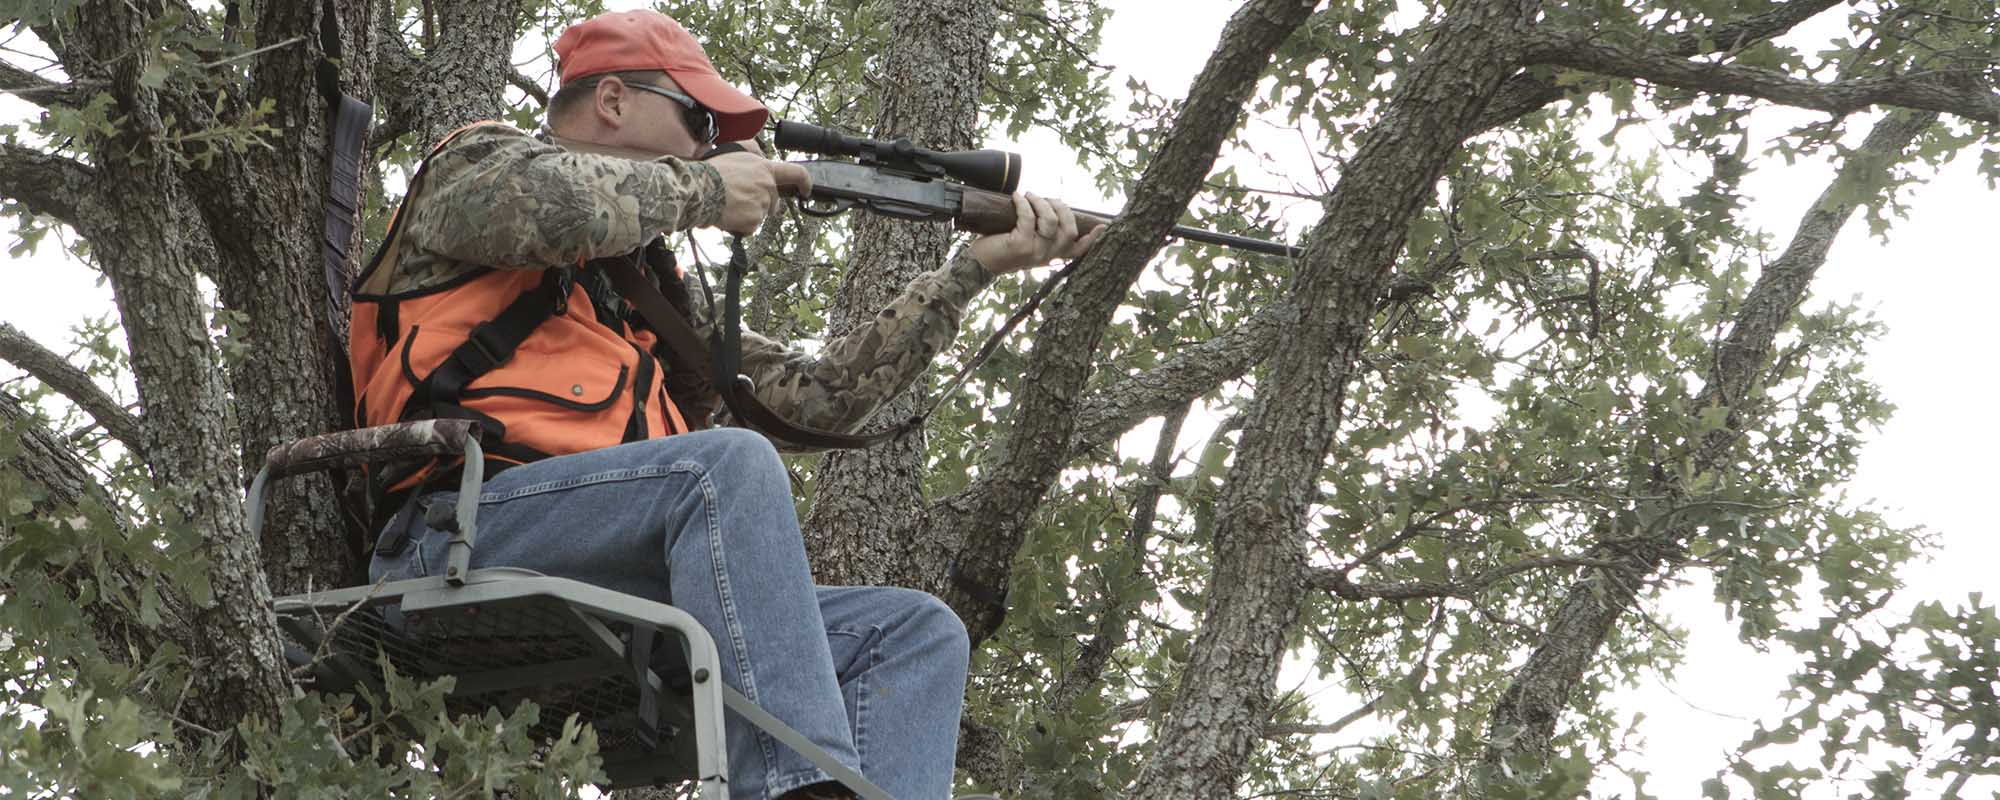 Hunting Season Begins With a Review of Safety